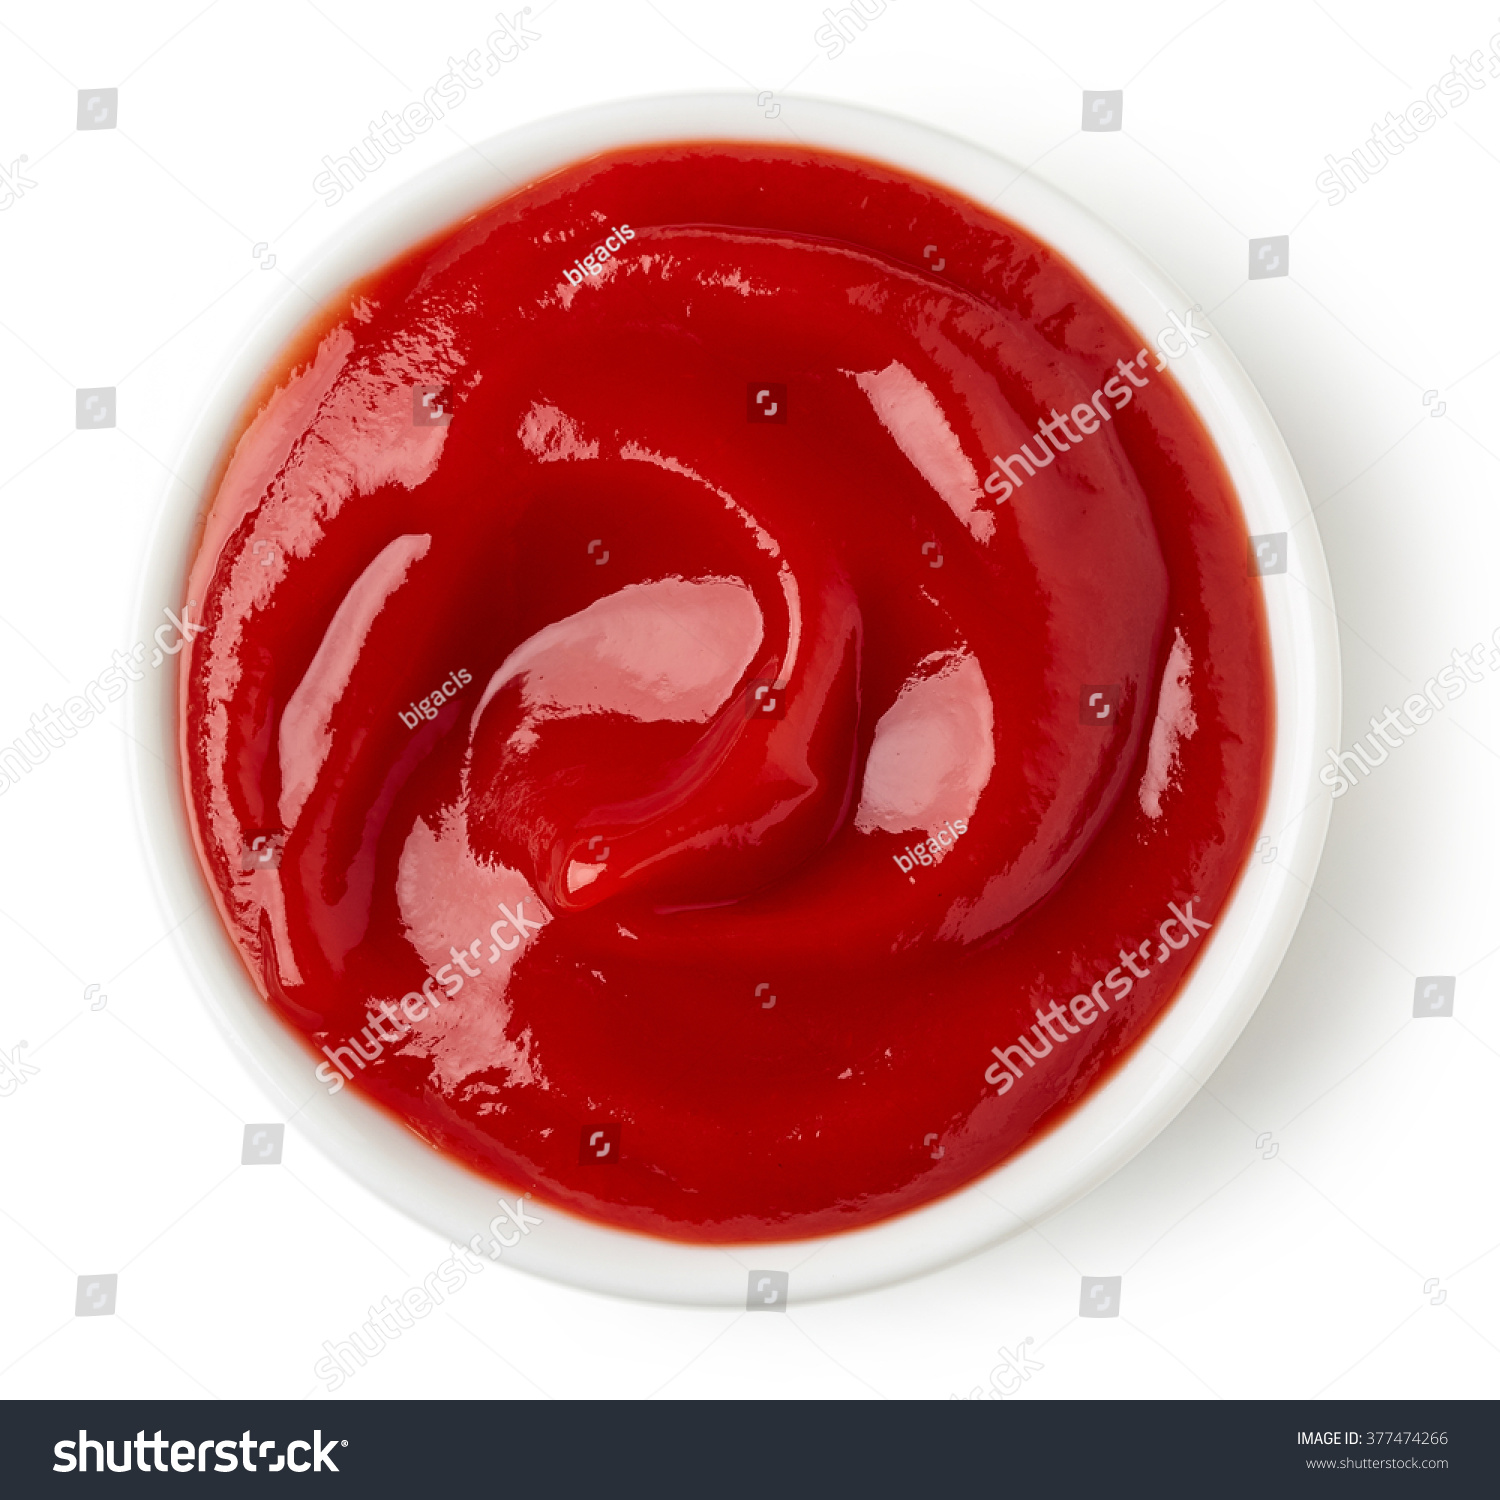 Bowl of ketchup or tomato sauce isolated  on white background, top view #377474266